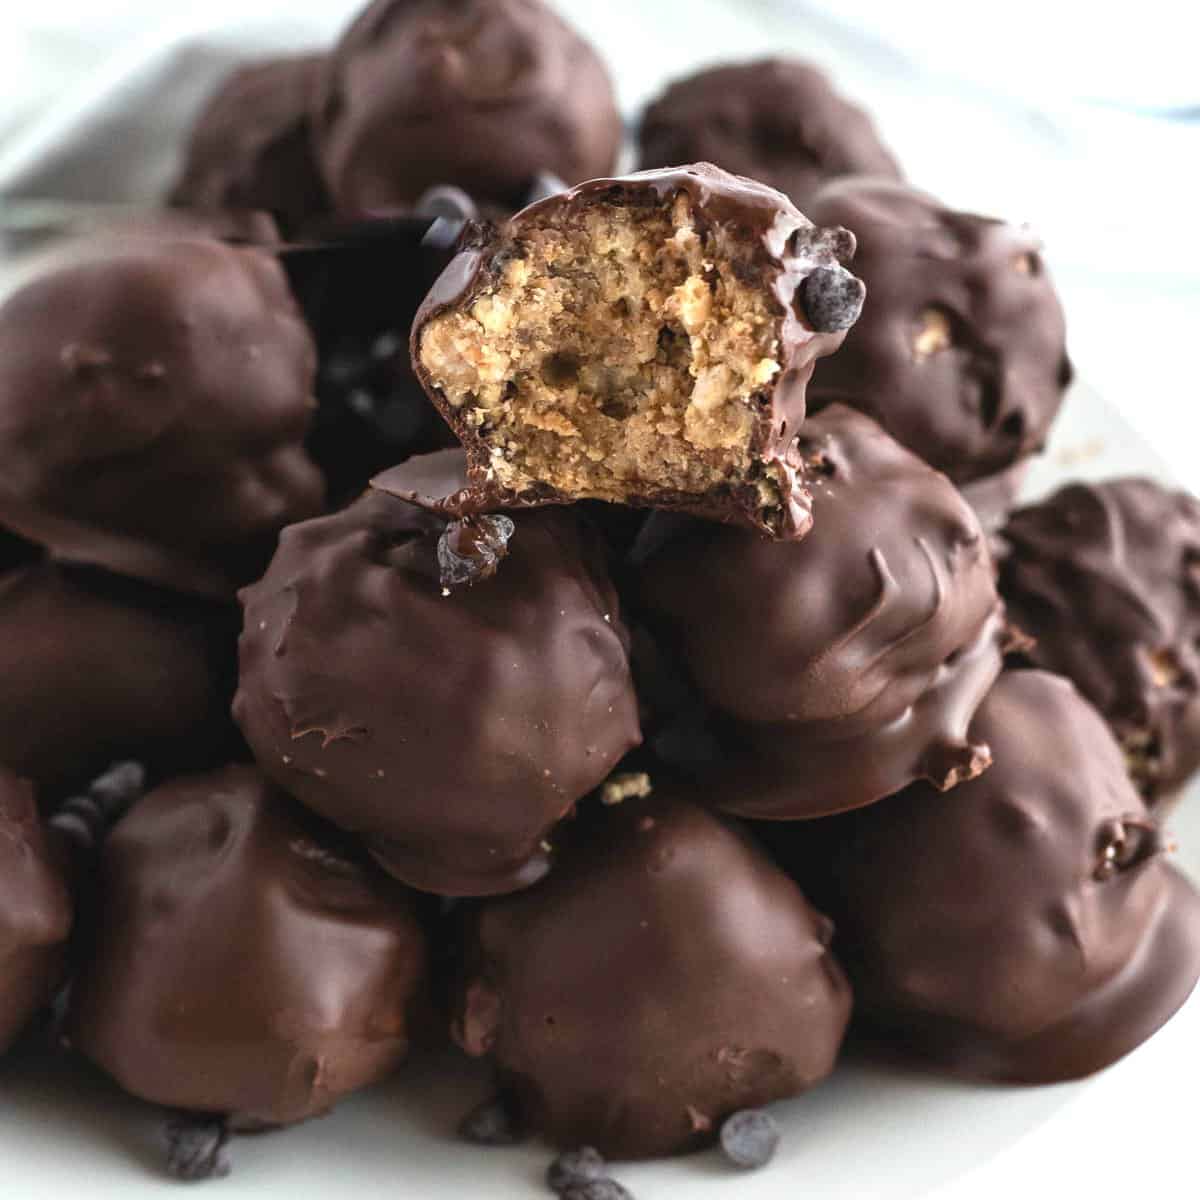 Close up photo of a pile of the chocolate balls no bake recipe with a bite out of the top front ball to show the rice Krispie treat inside.